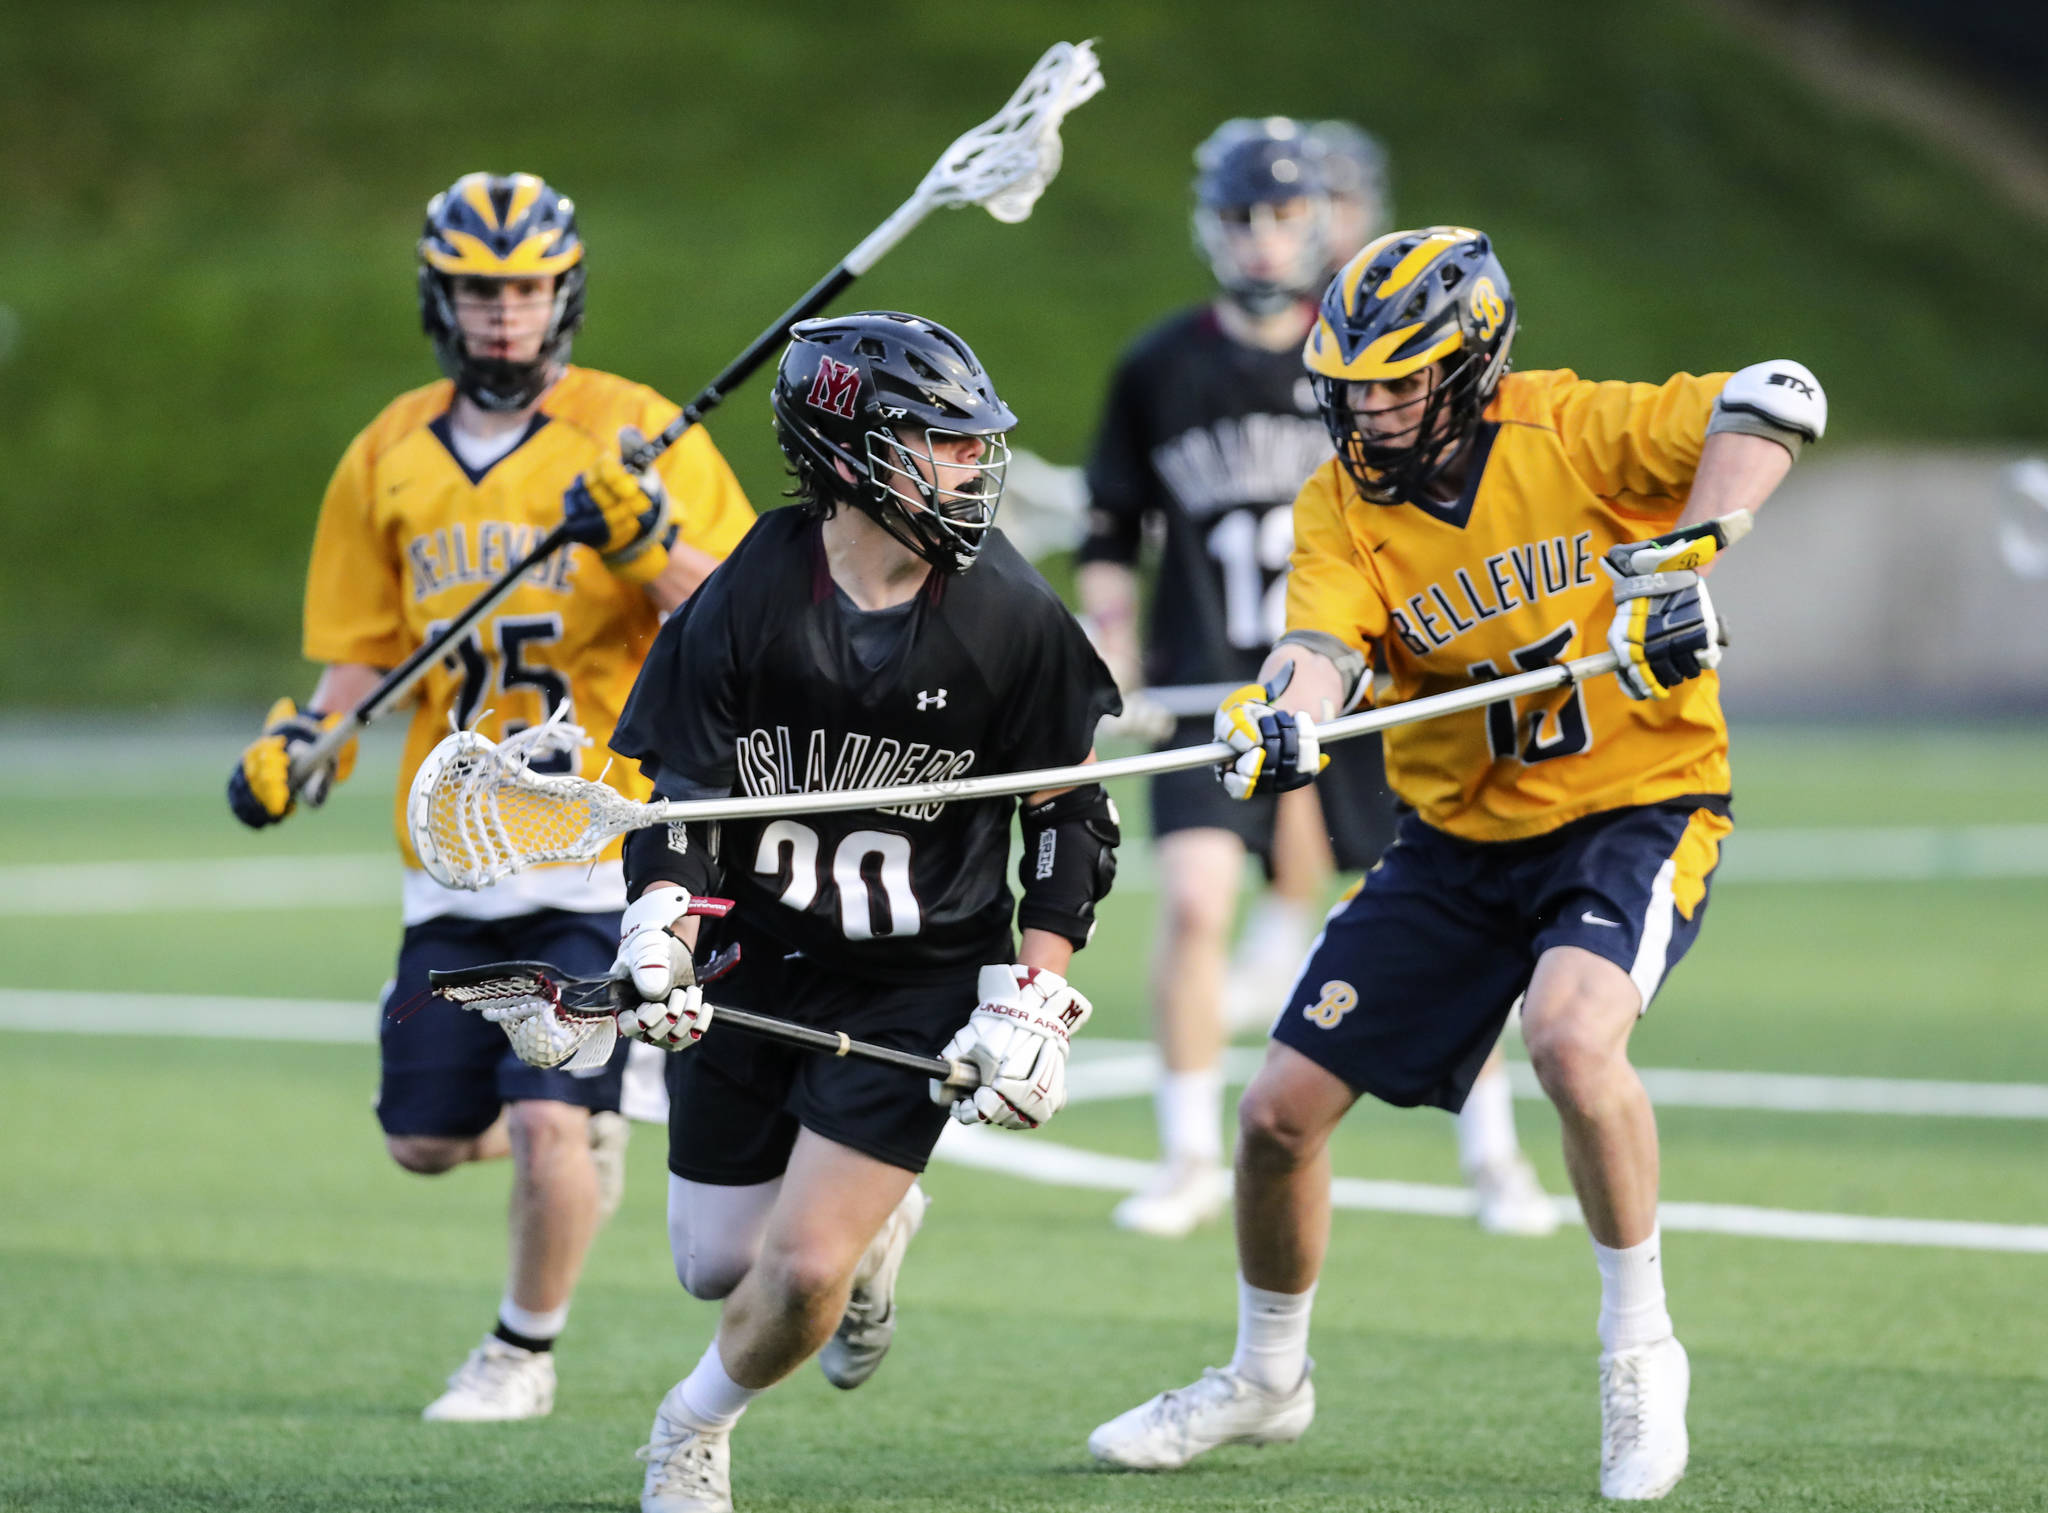 Photo courtesy of Rick Edelman/Rick Edelman Photography                                The Bellevue Wolverines boys lacrosse team earned a 8-6 victory against the Mercer Island Islanders in the Washington High School Boys Lacrosse Association 3A state title game on May 26 at the Starfire Sports Complex in Tukwila. Bellevue finished the 2018 season with an overall record of 17-2. The Islanders finished with an overall record of 16-7. Mercer Island player junior Donnie Howard, left, tries to maneuver around Bellevue player in the title contest.